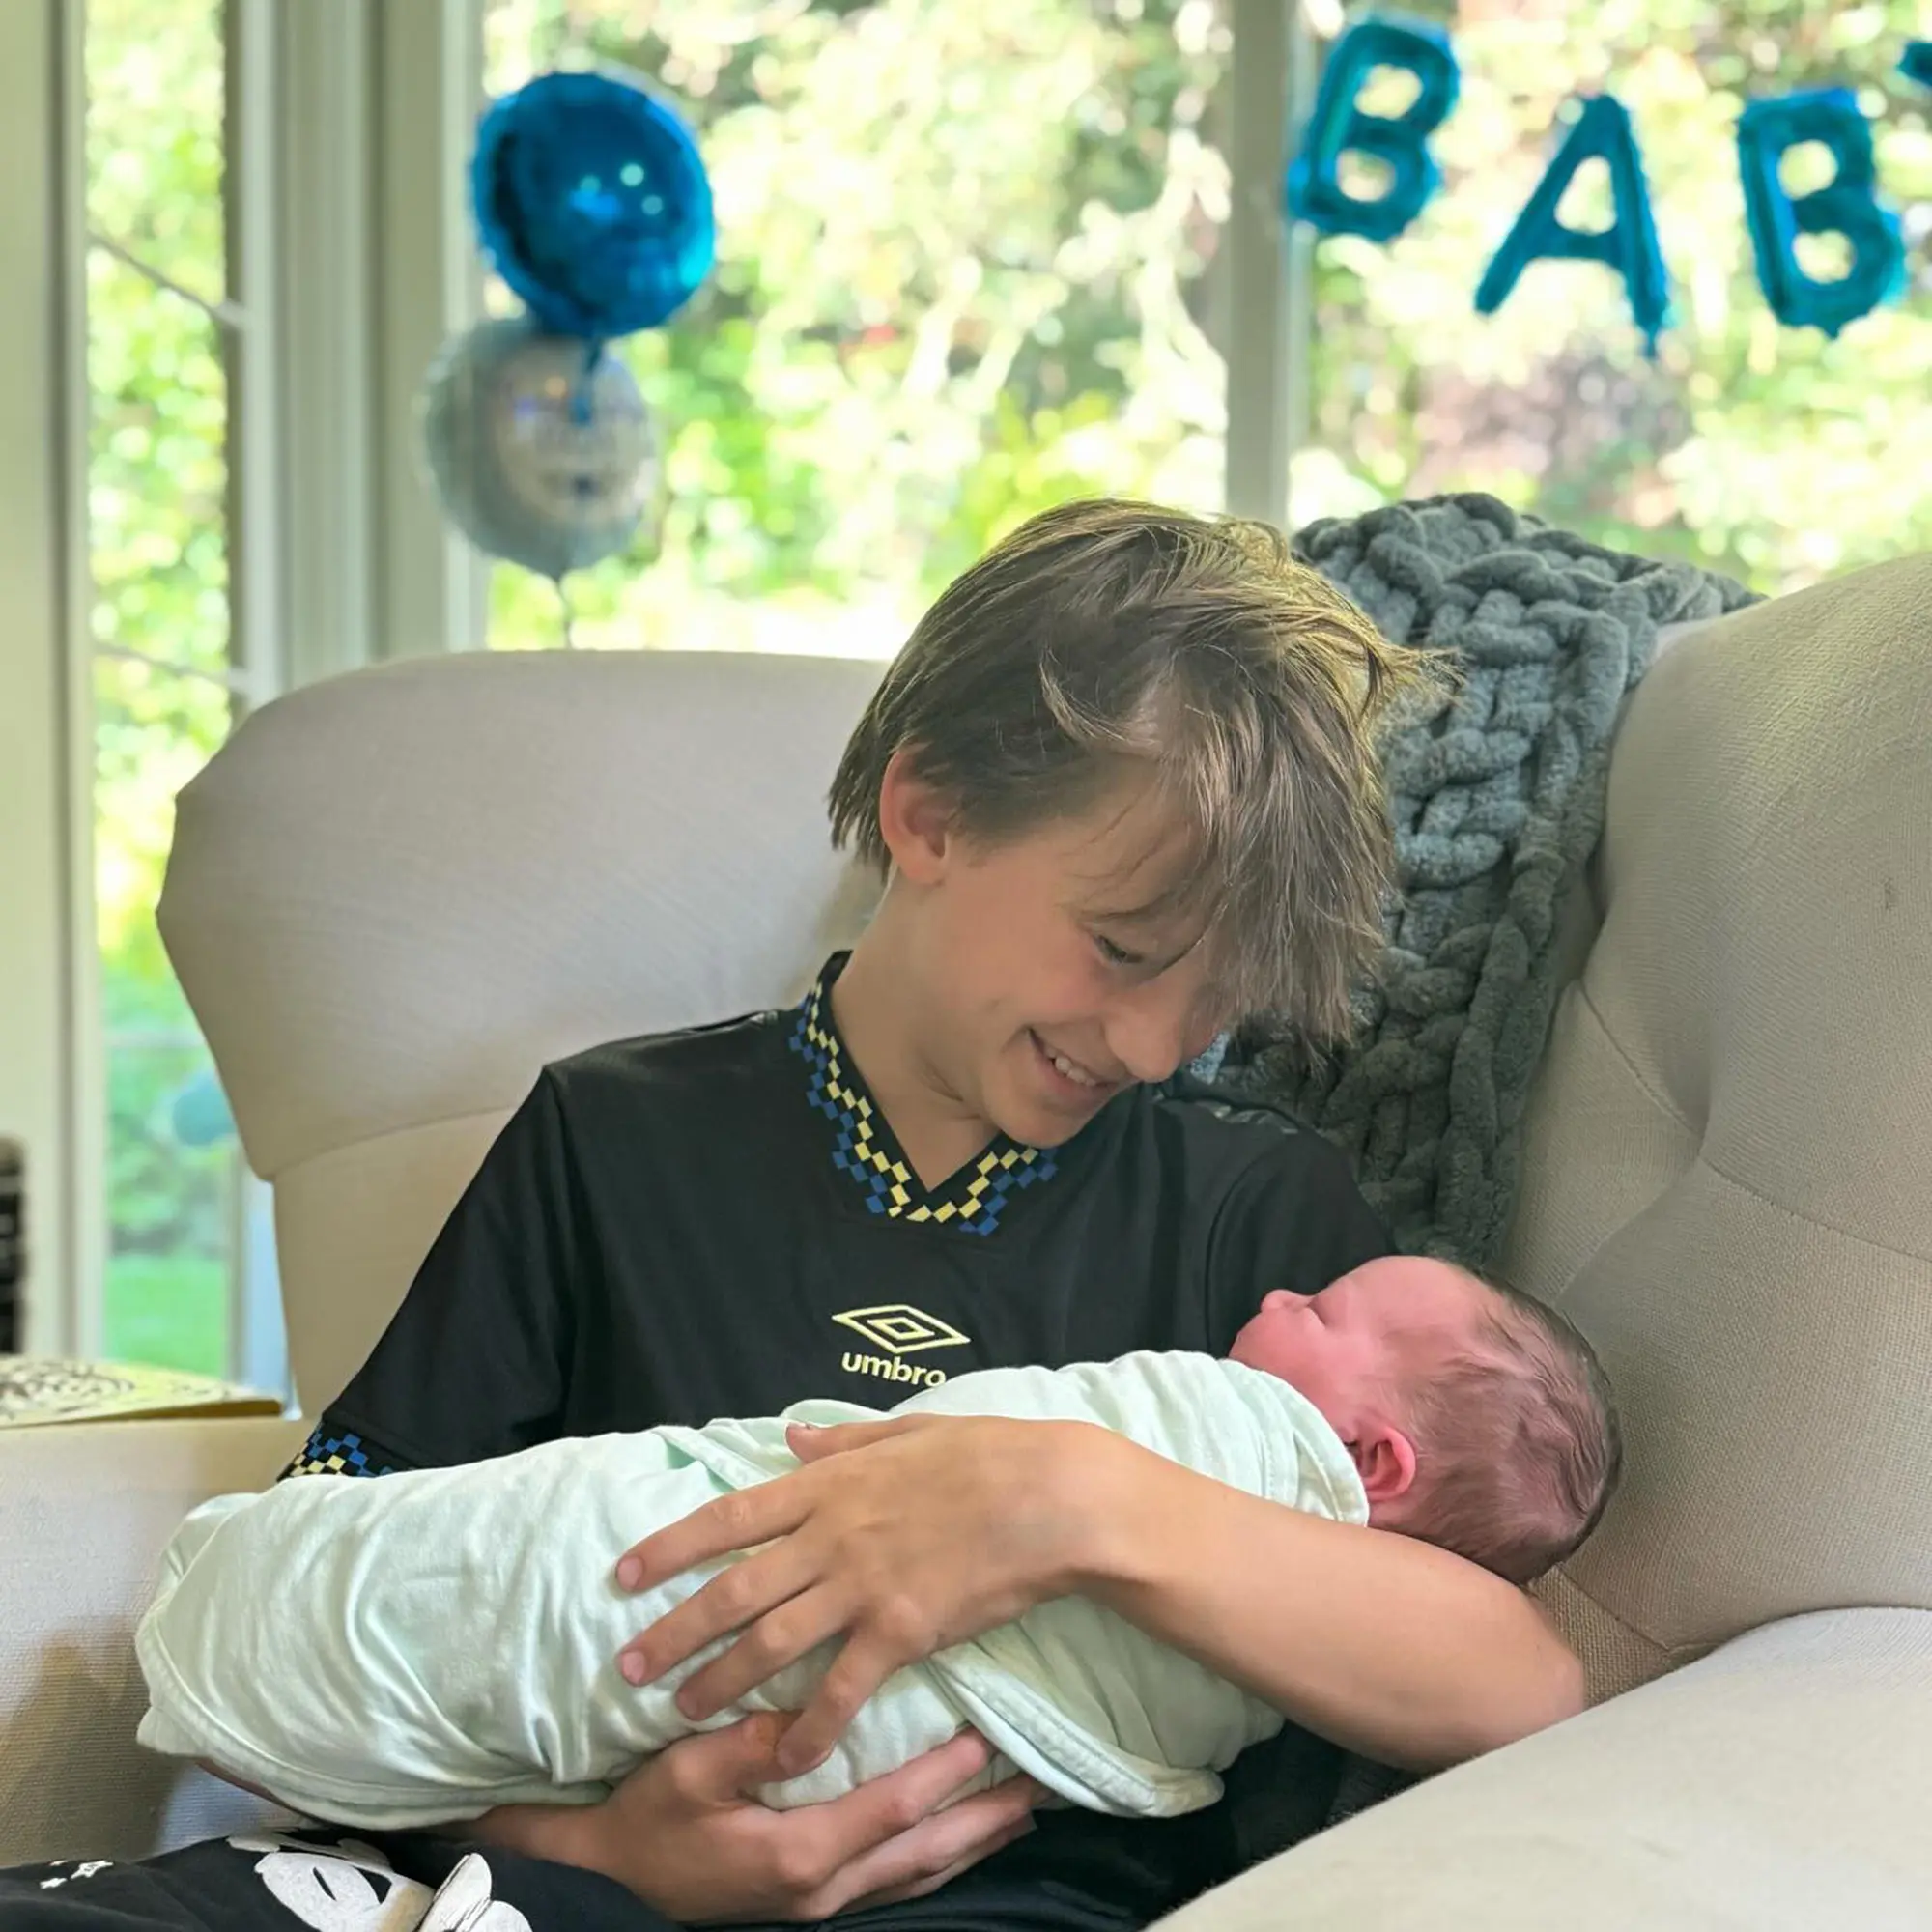 Celebrity Baby Boom: Muse's Matt Bellamy Welcomes a Star-Studded Arrival!